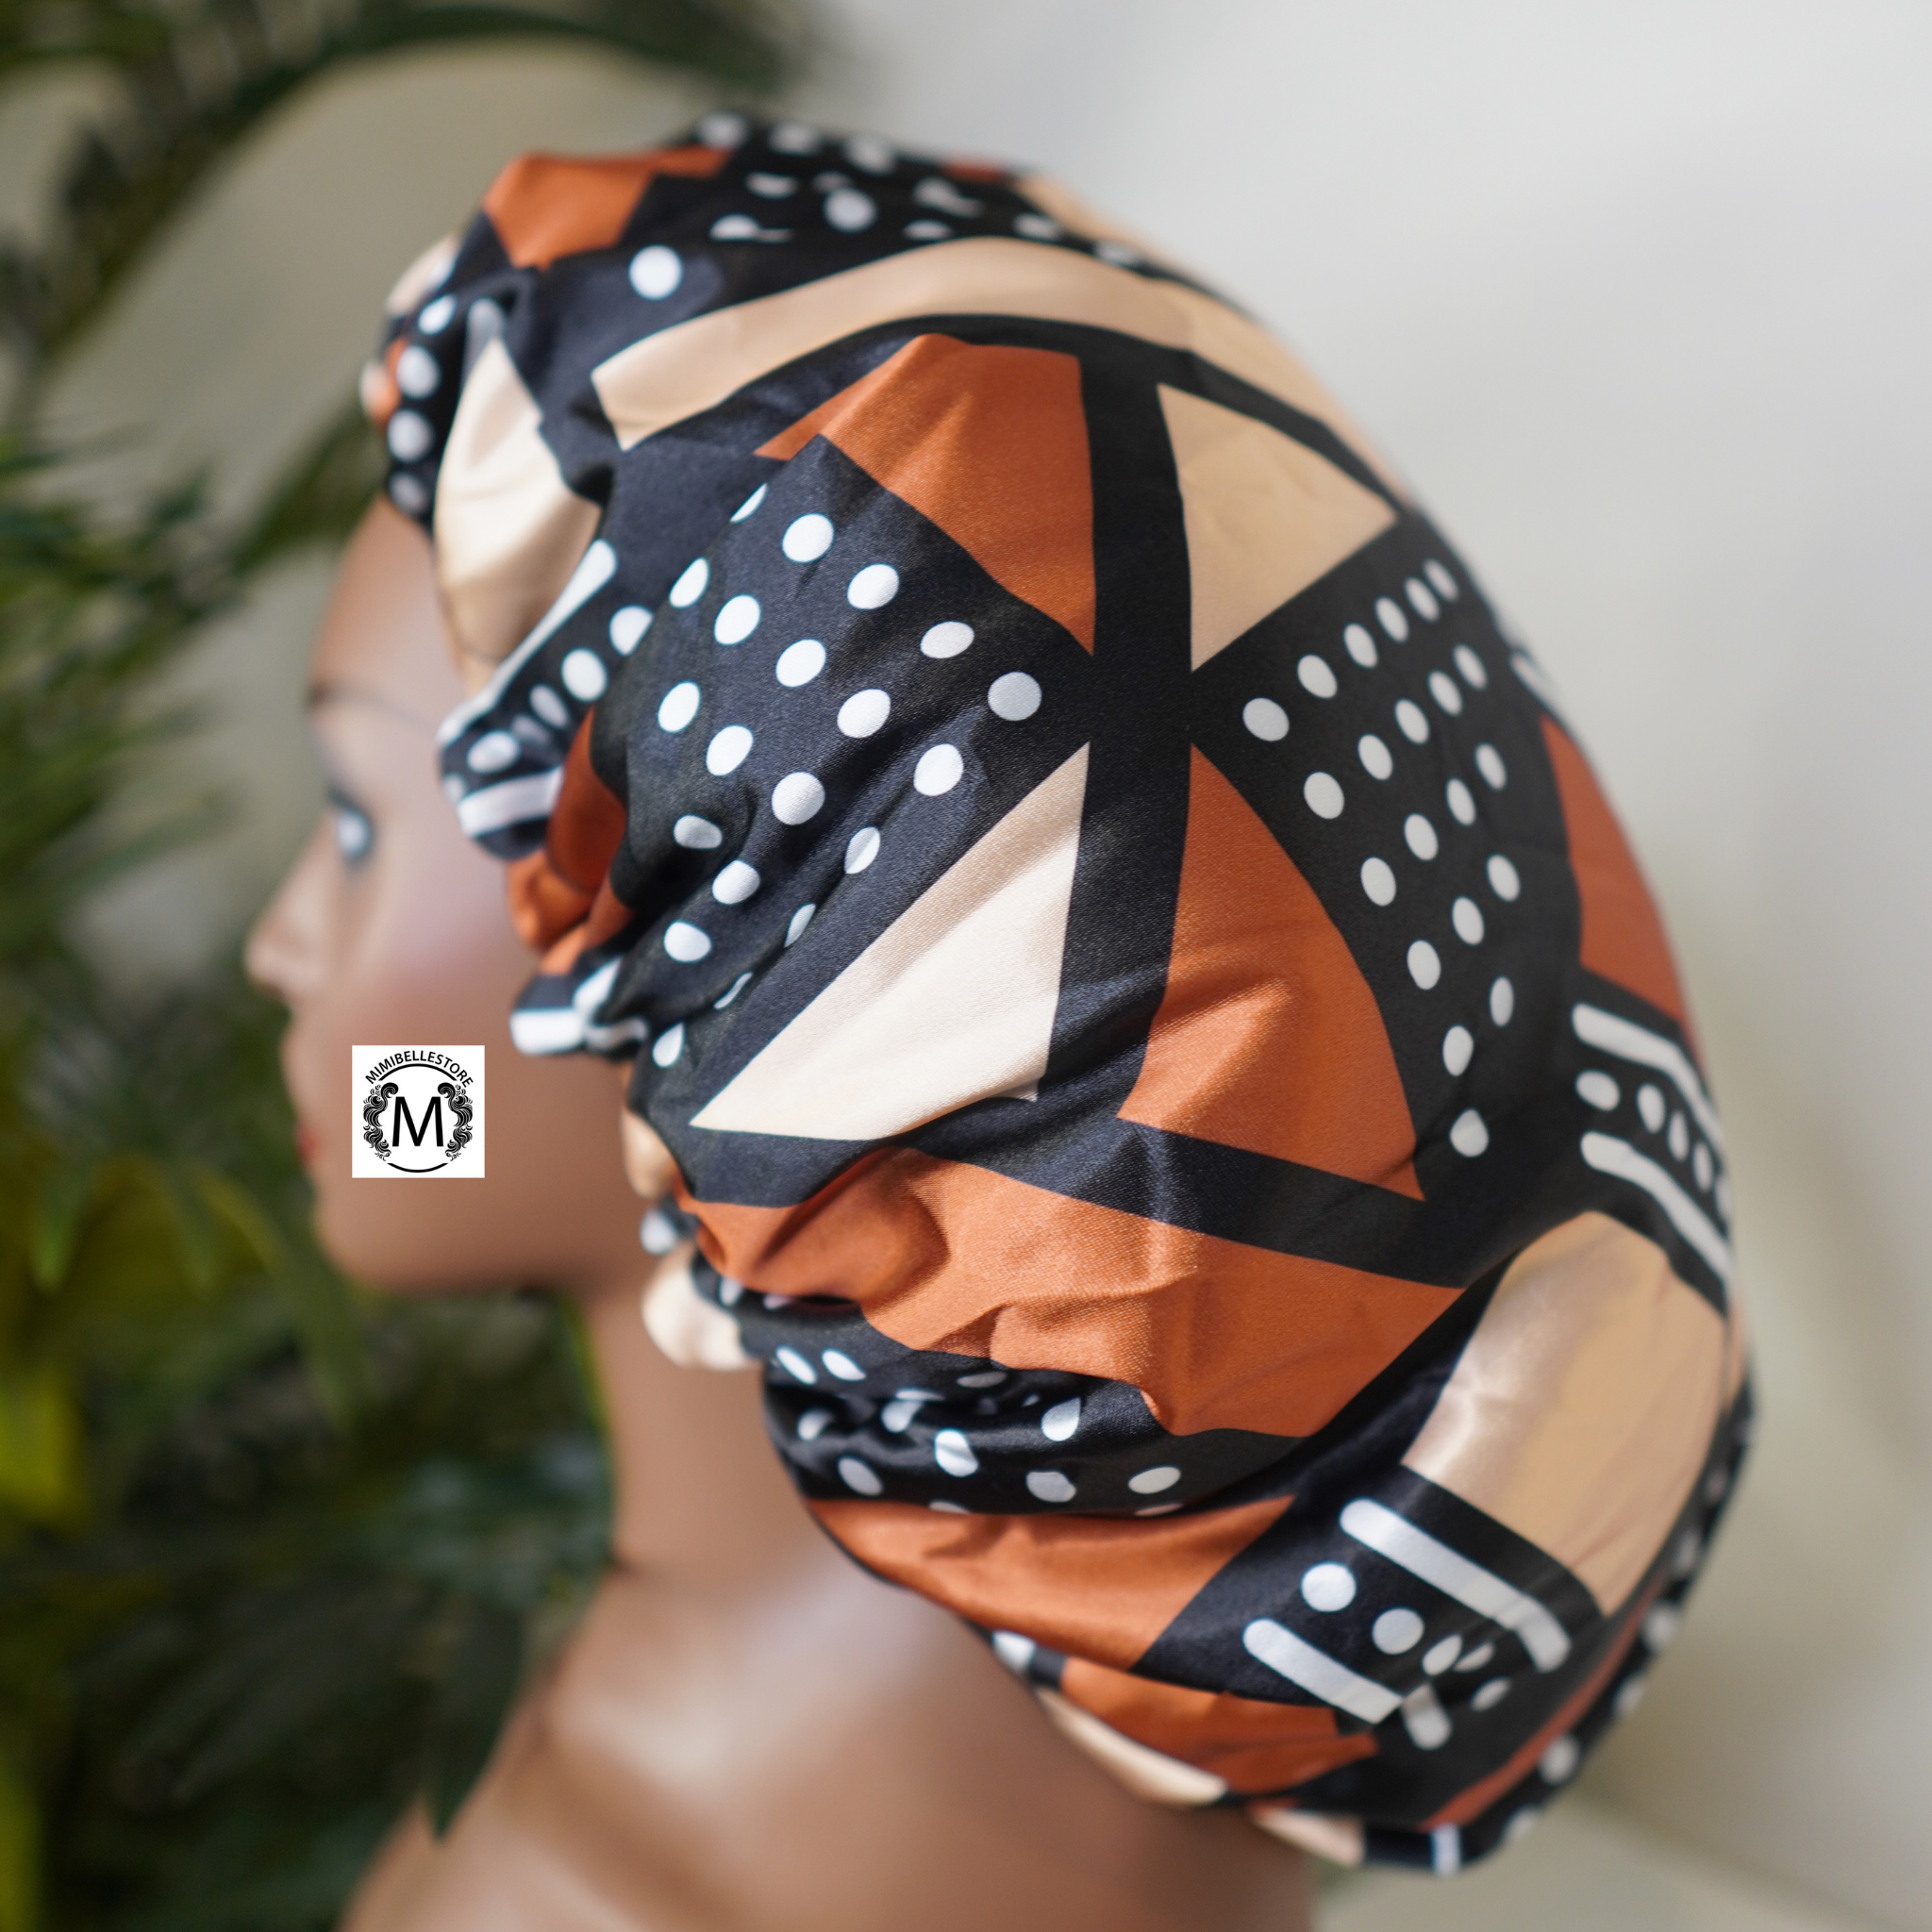 100% SATIN BONNET AFRICAN PRINT / REVERSIBLE AND ADJUSTABLE ( VERY STYLISH)